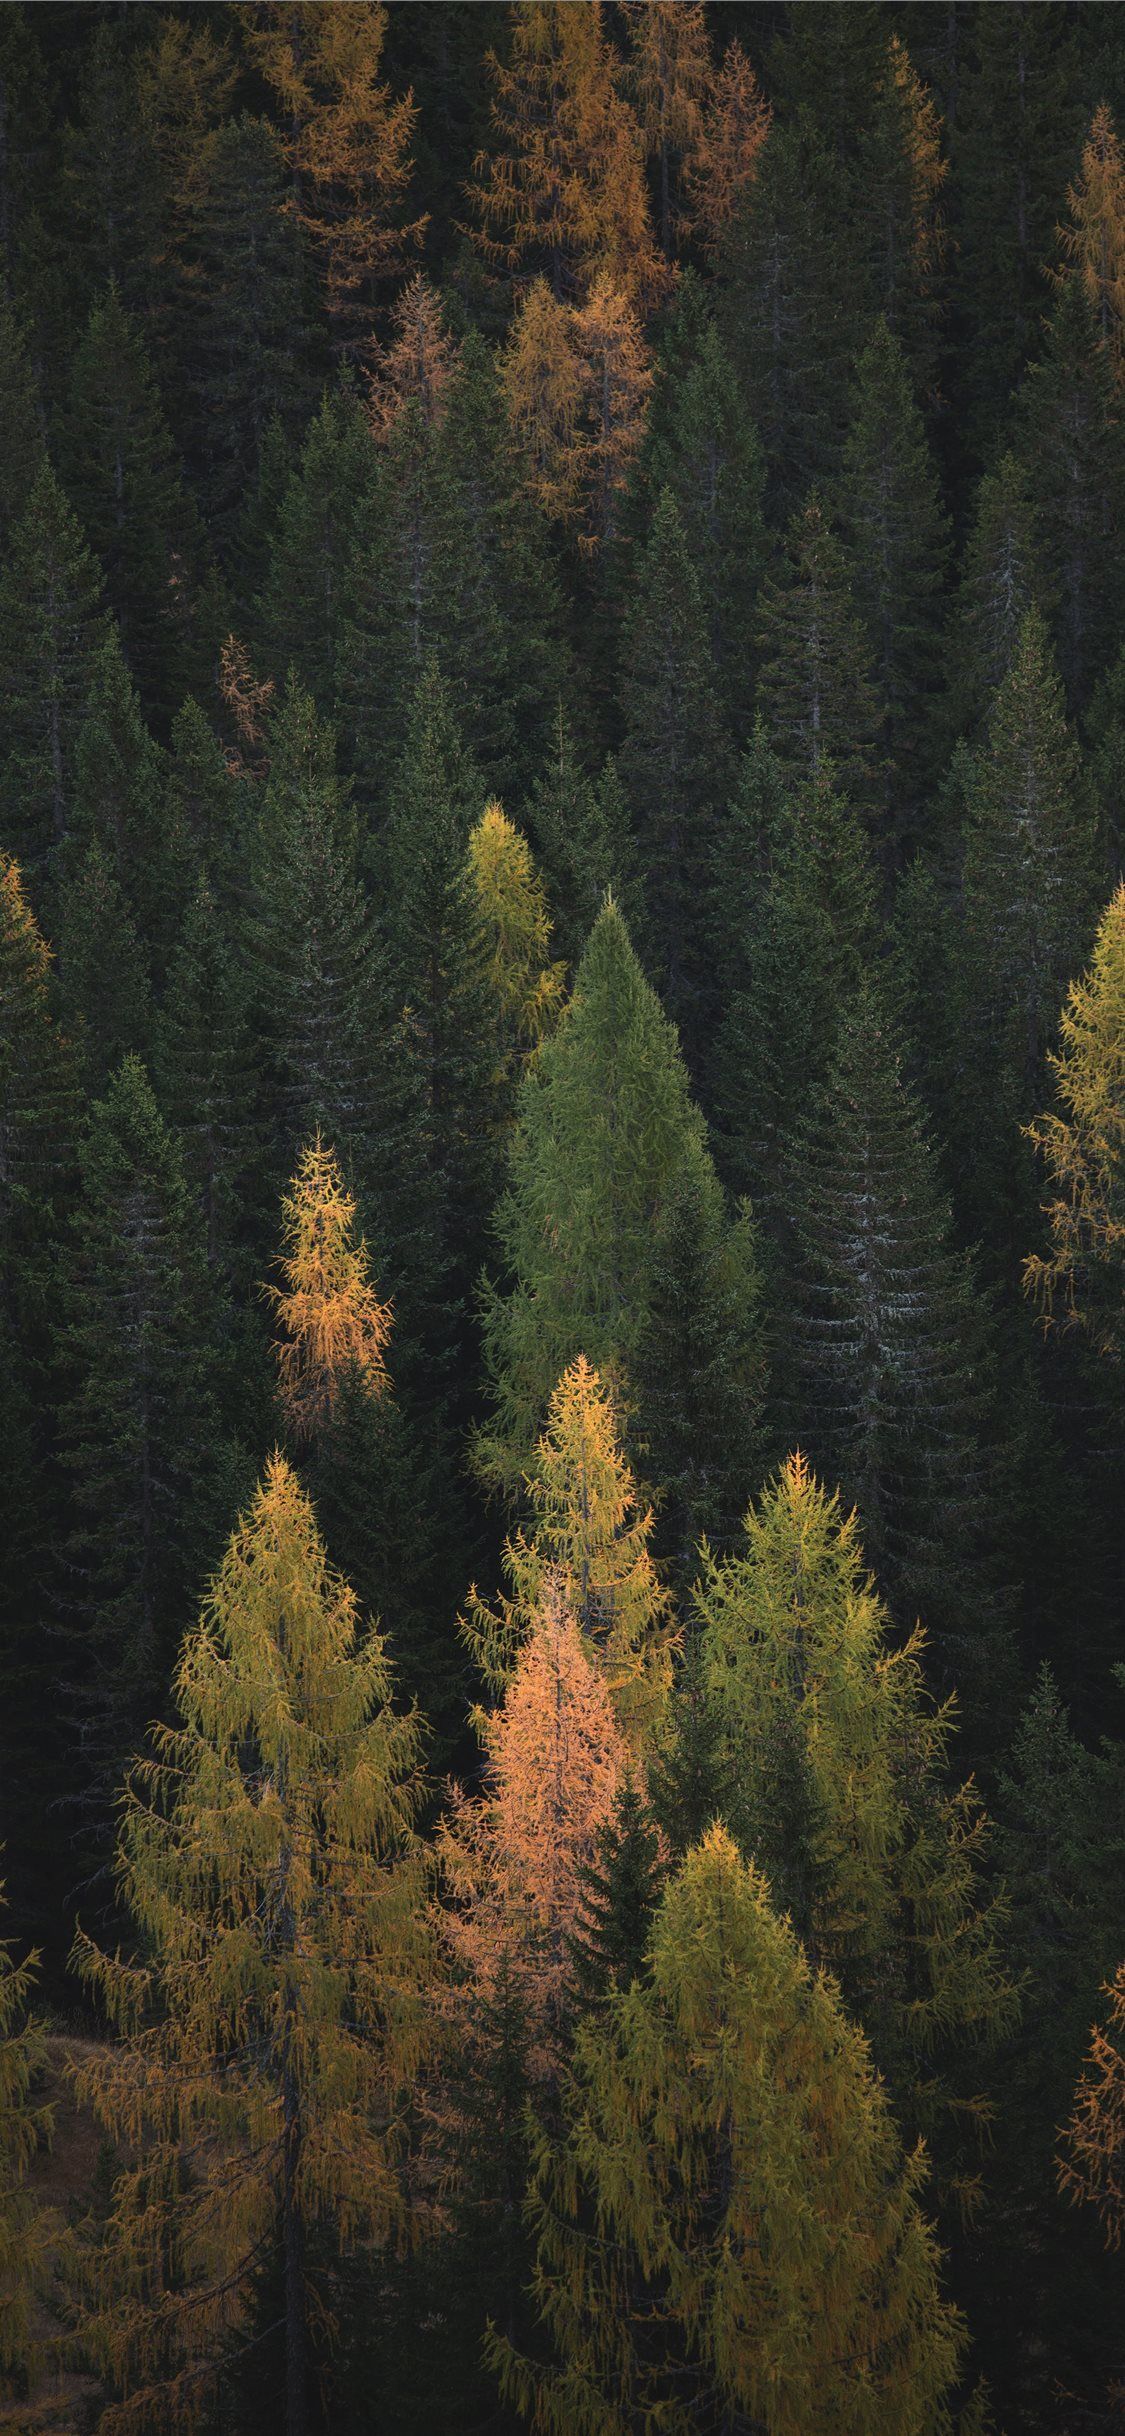 A forest of evergreen trees with a few trees in the foreground that have turned yellow - Forest